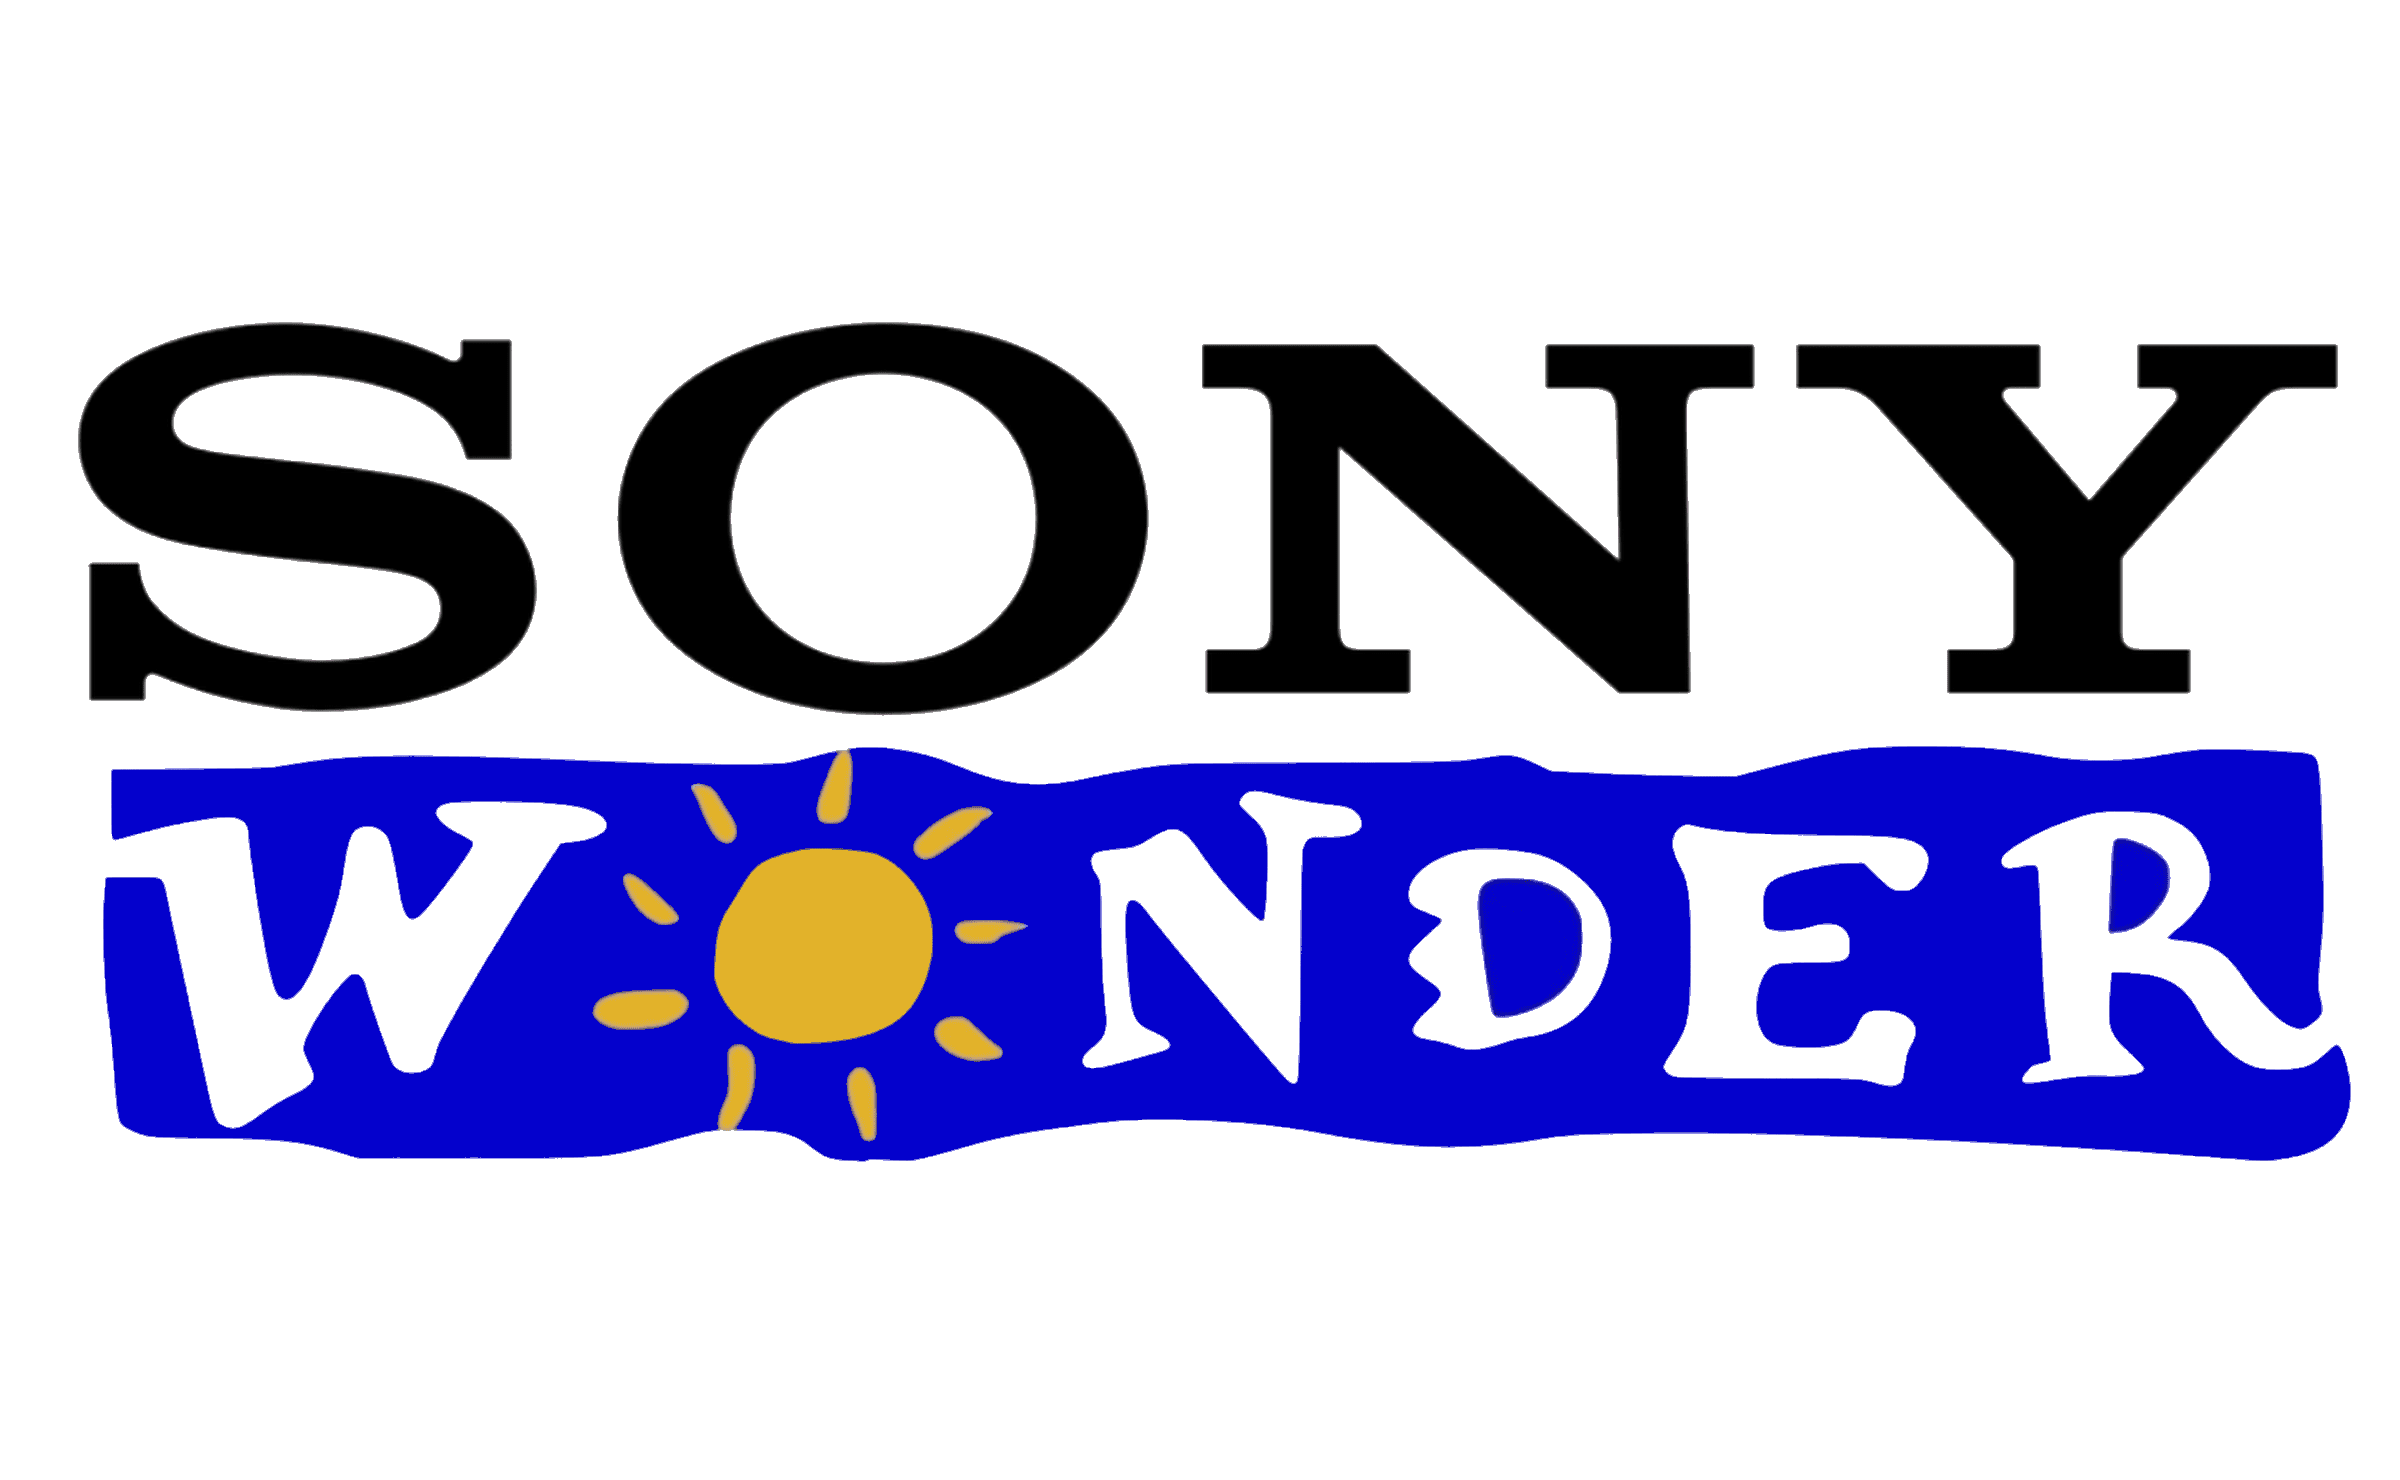 Sony Wonder Logo And Symbol Meaning History Png